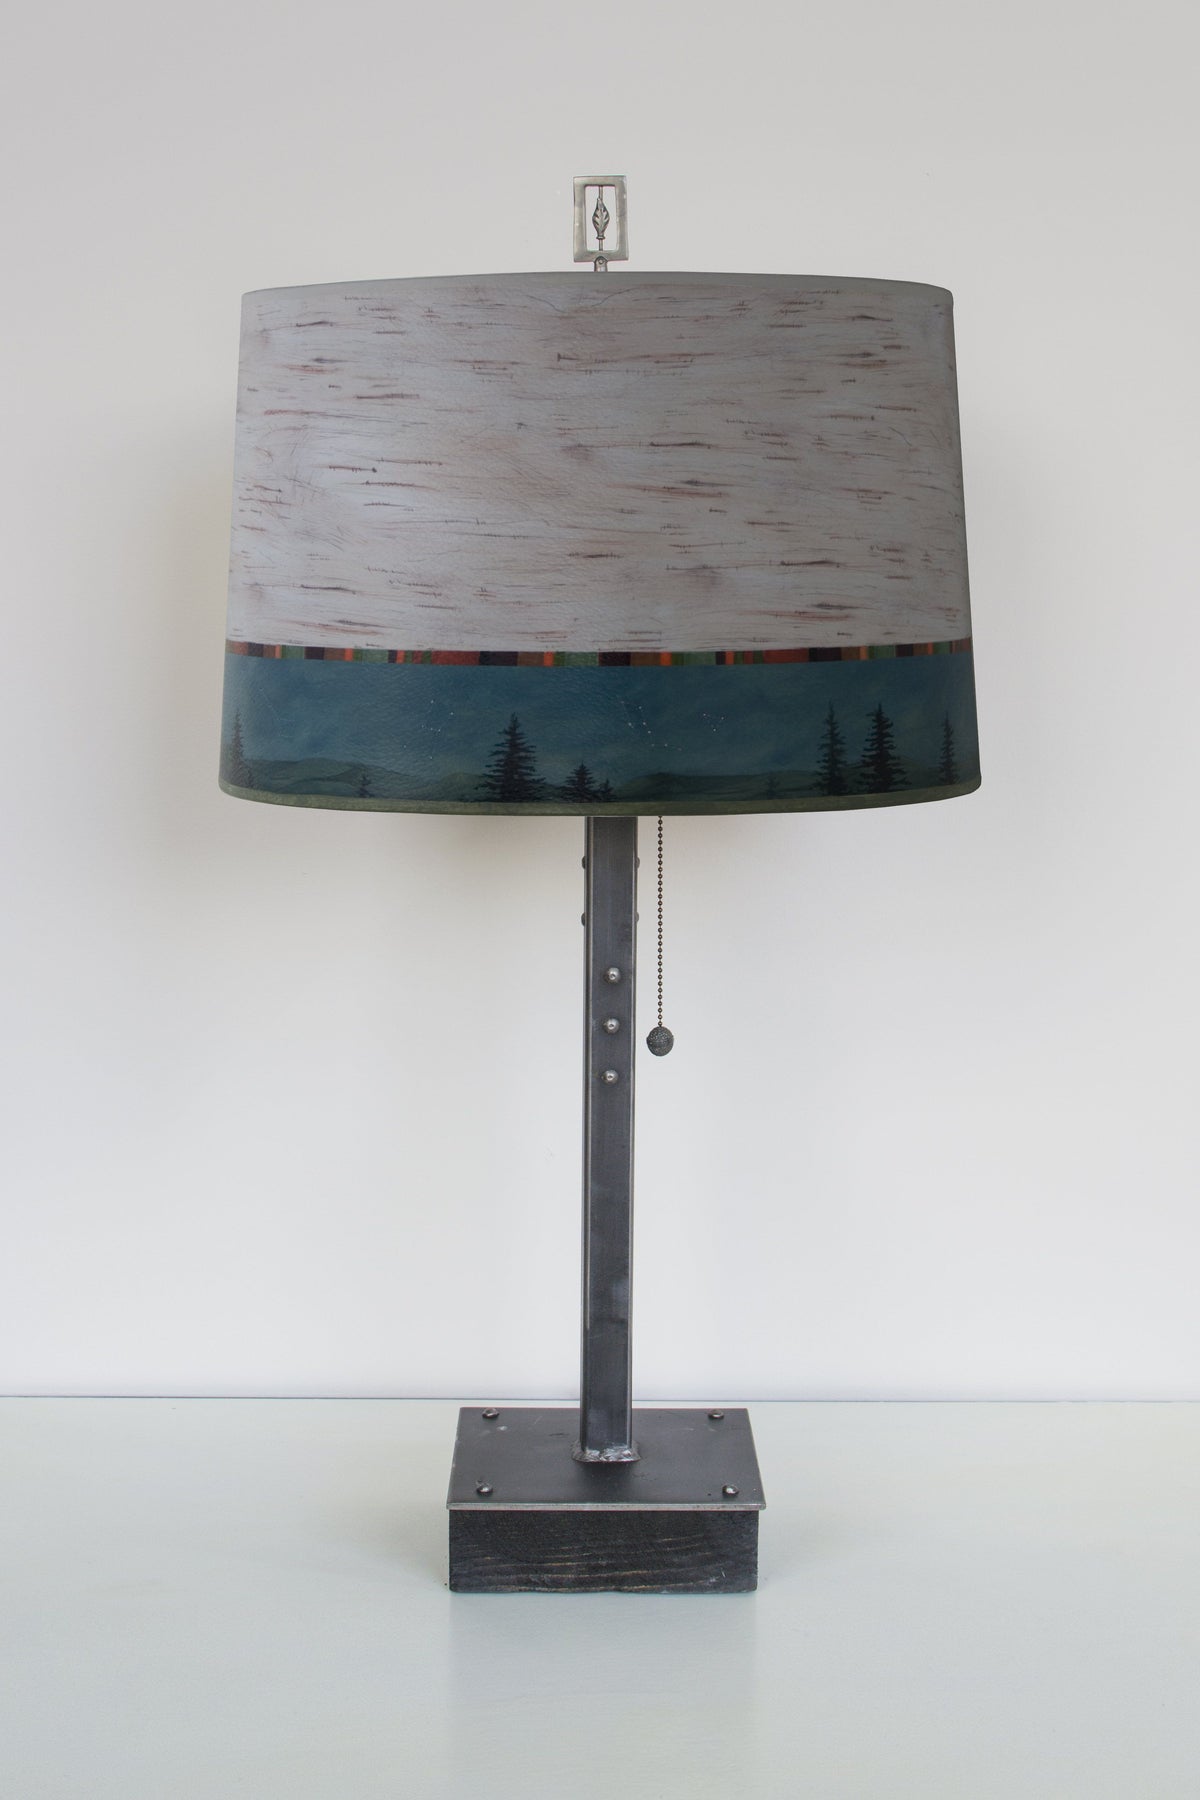 Steel Table Lamp on Wood with Large Drum Shade in Birch Midnight